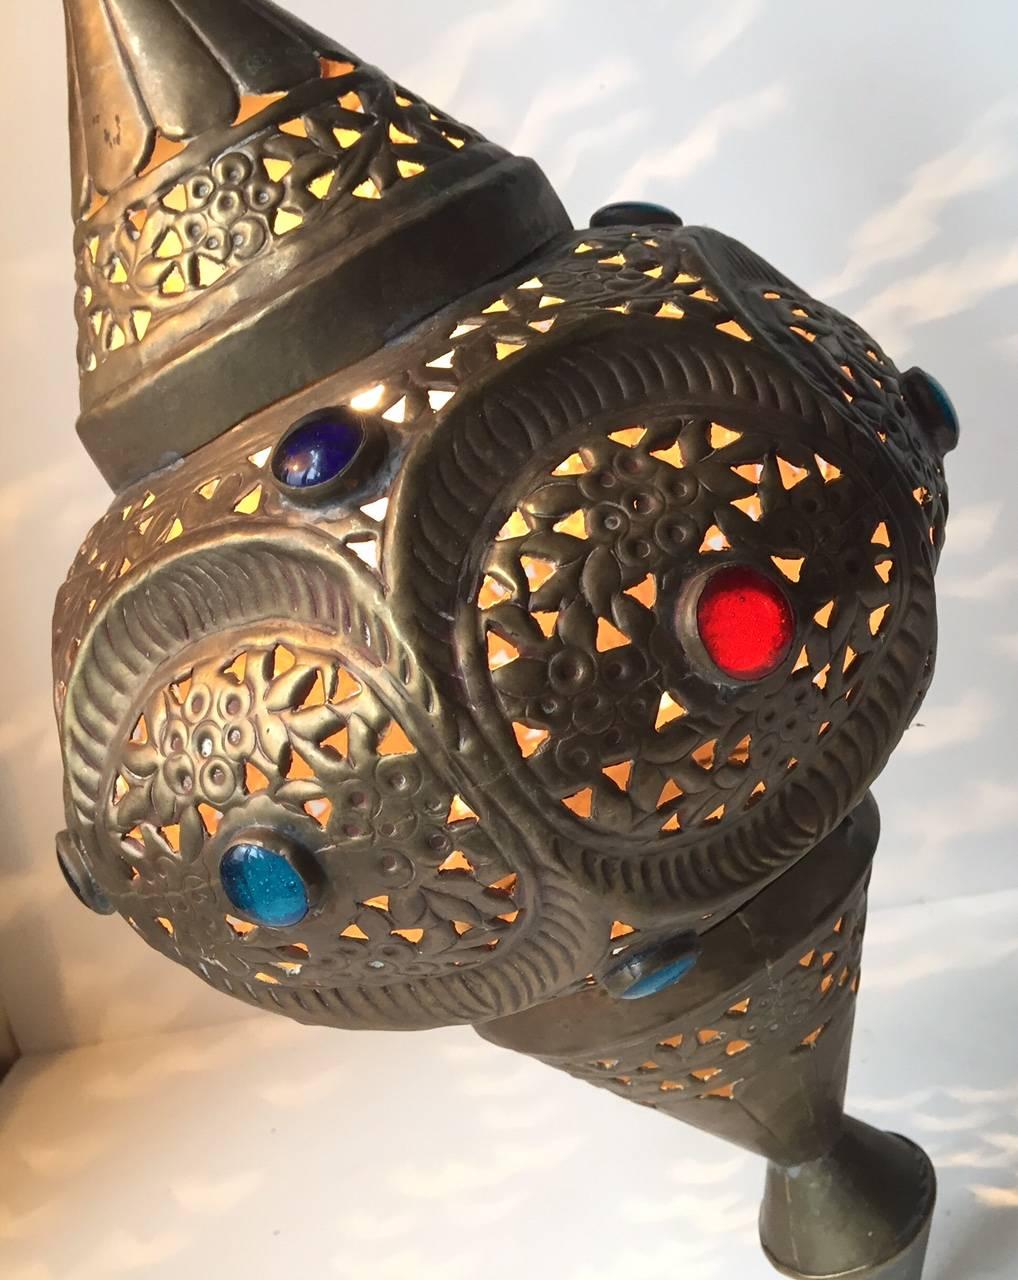 Beautifully handcrafted Moroccan lamp finely chiselled and bejeweled by Moroccan artisans in Marrakech. When lid this light creates small fire-flies that inhabit the surrounding areas.